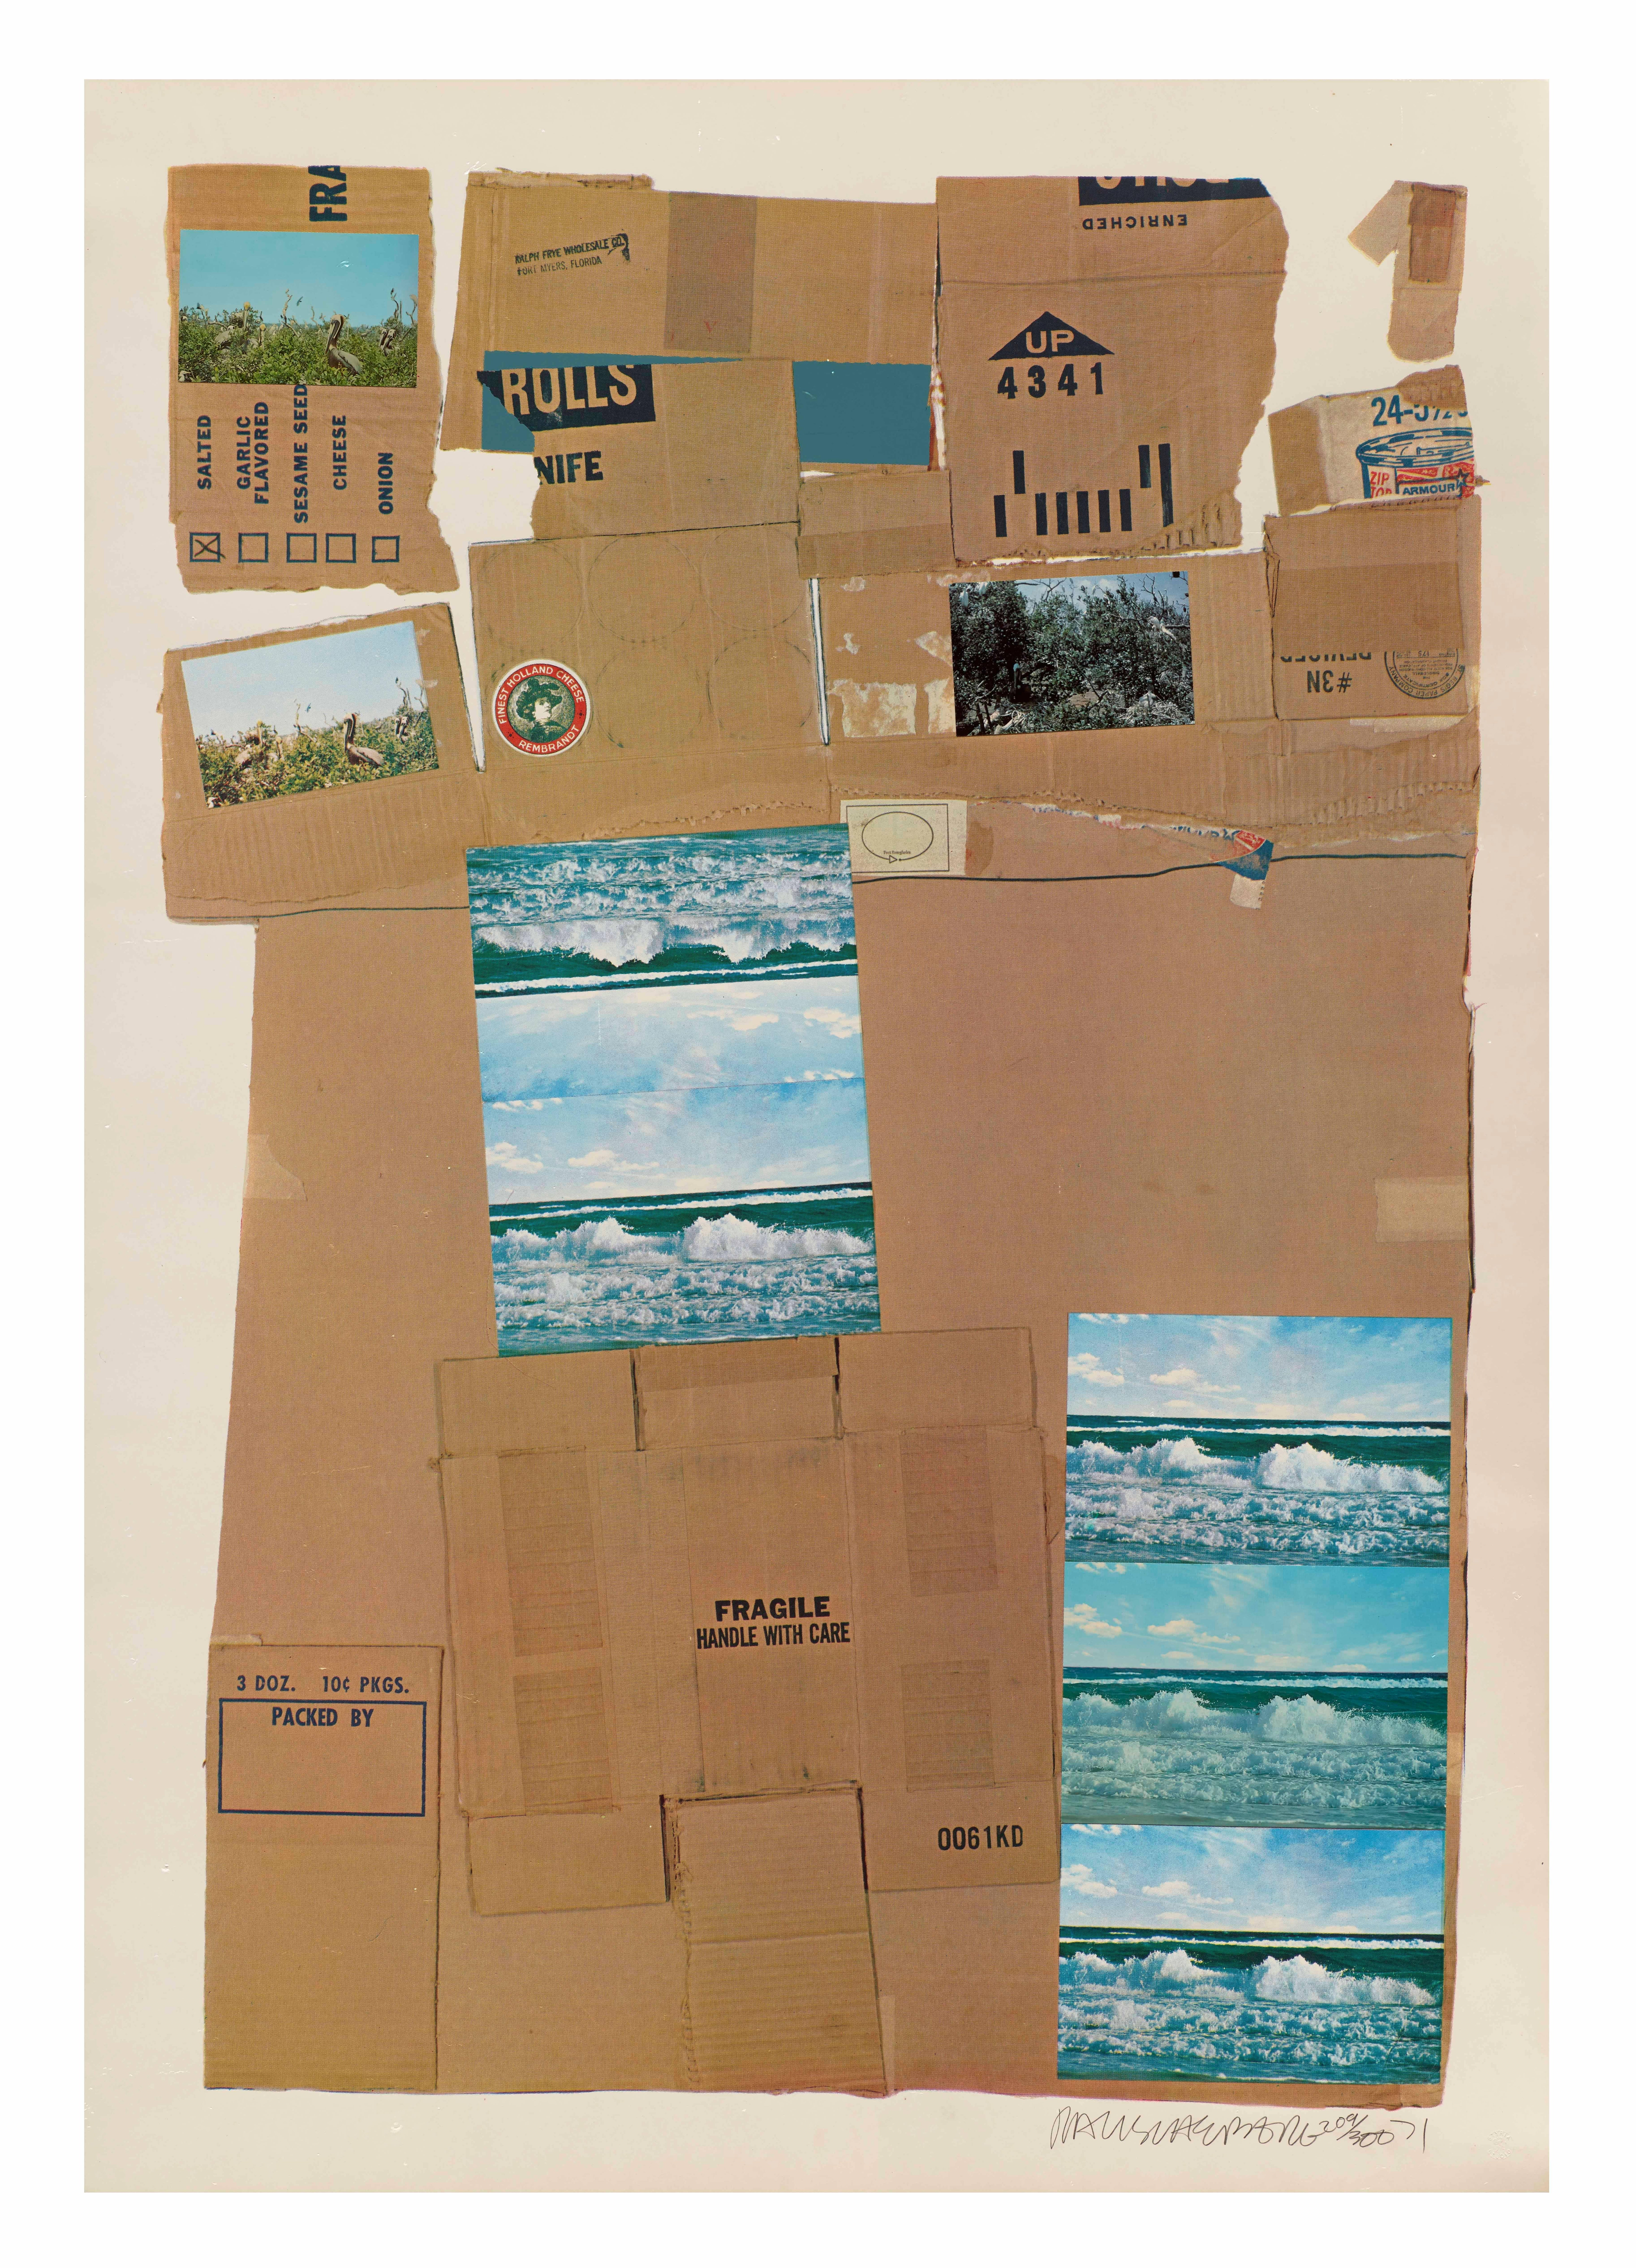 General Delivery - Print by Robert Rauschenberg